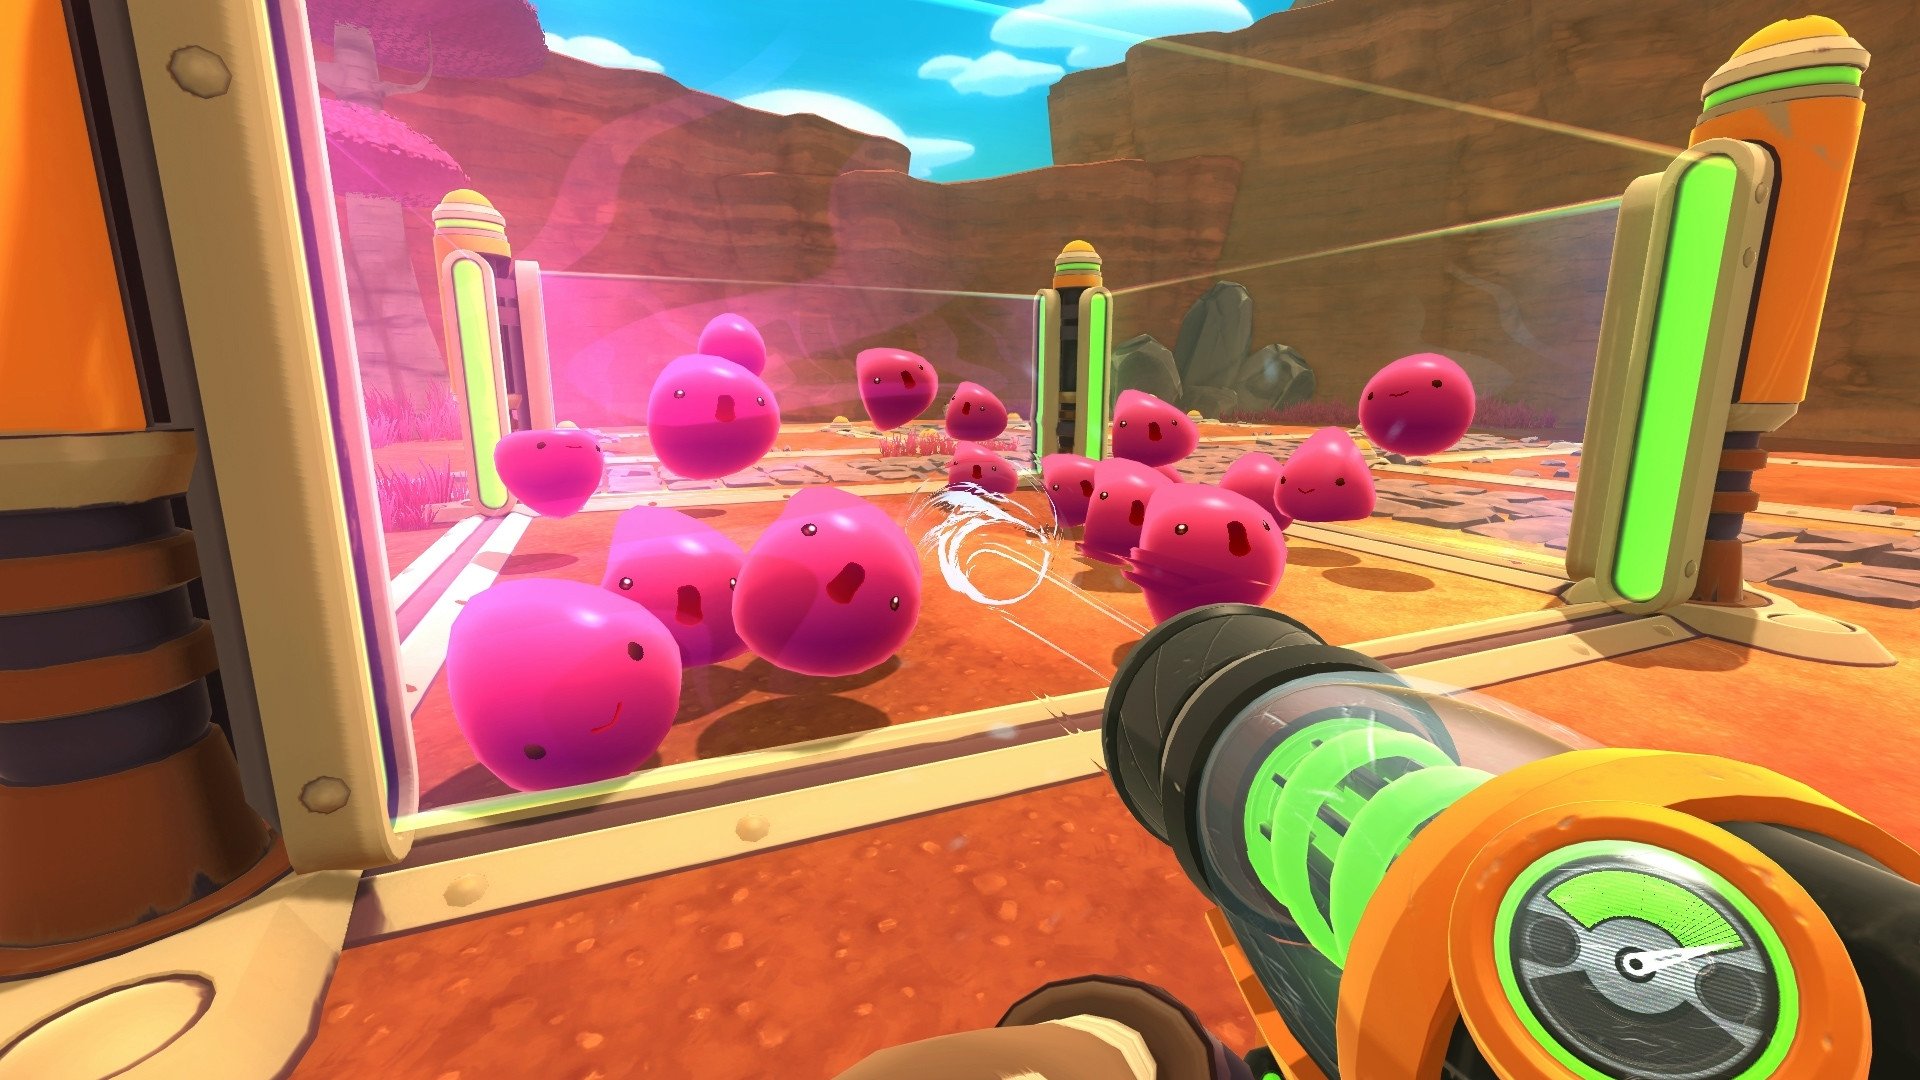 Slime Rancher 1.4 - Download for PC Free